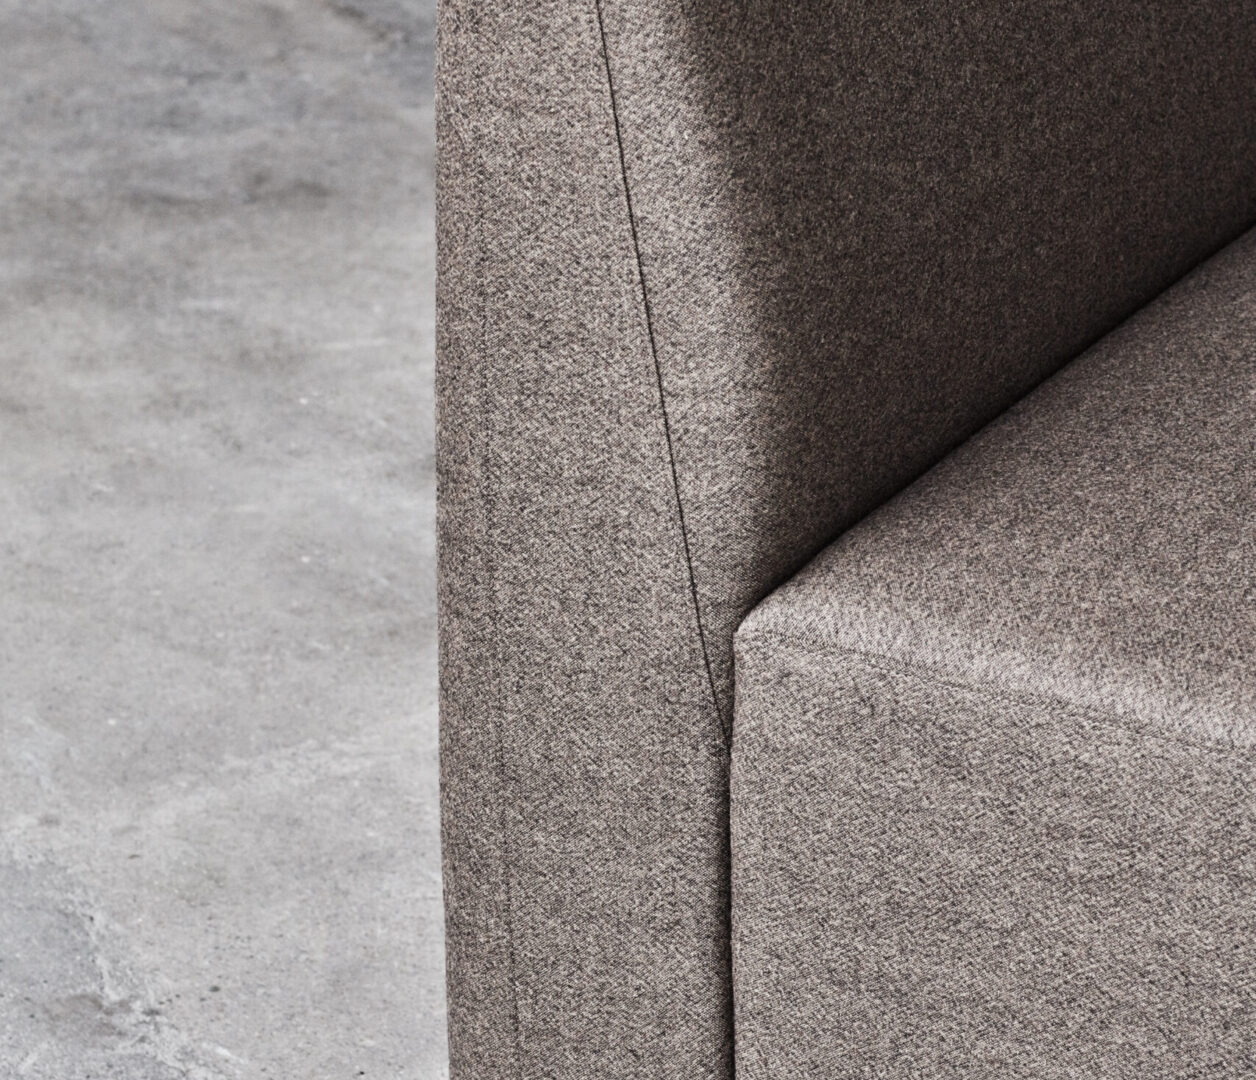 OCEE&FOUR – Soft Seating – FourLikes Sofa – Details Image 5